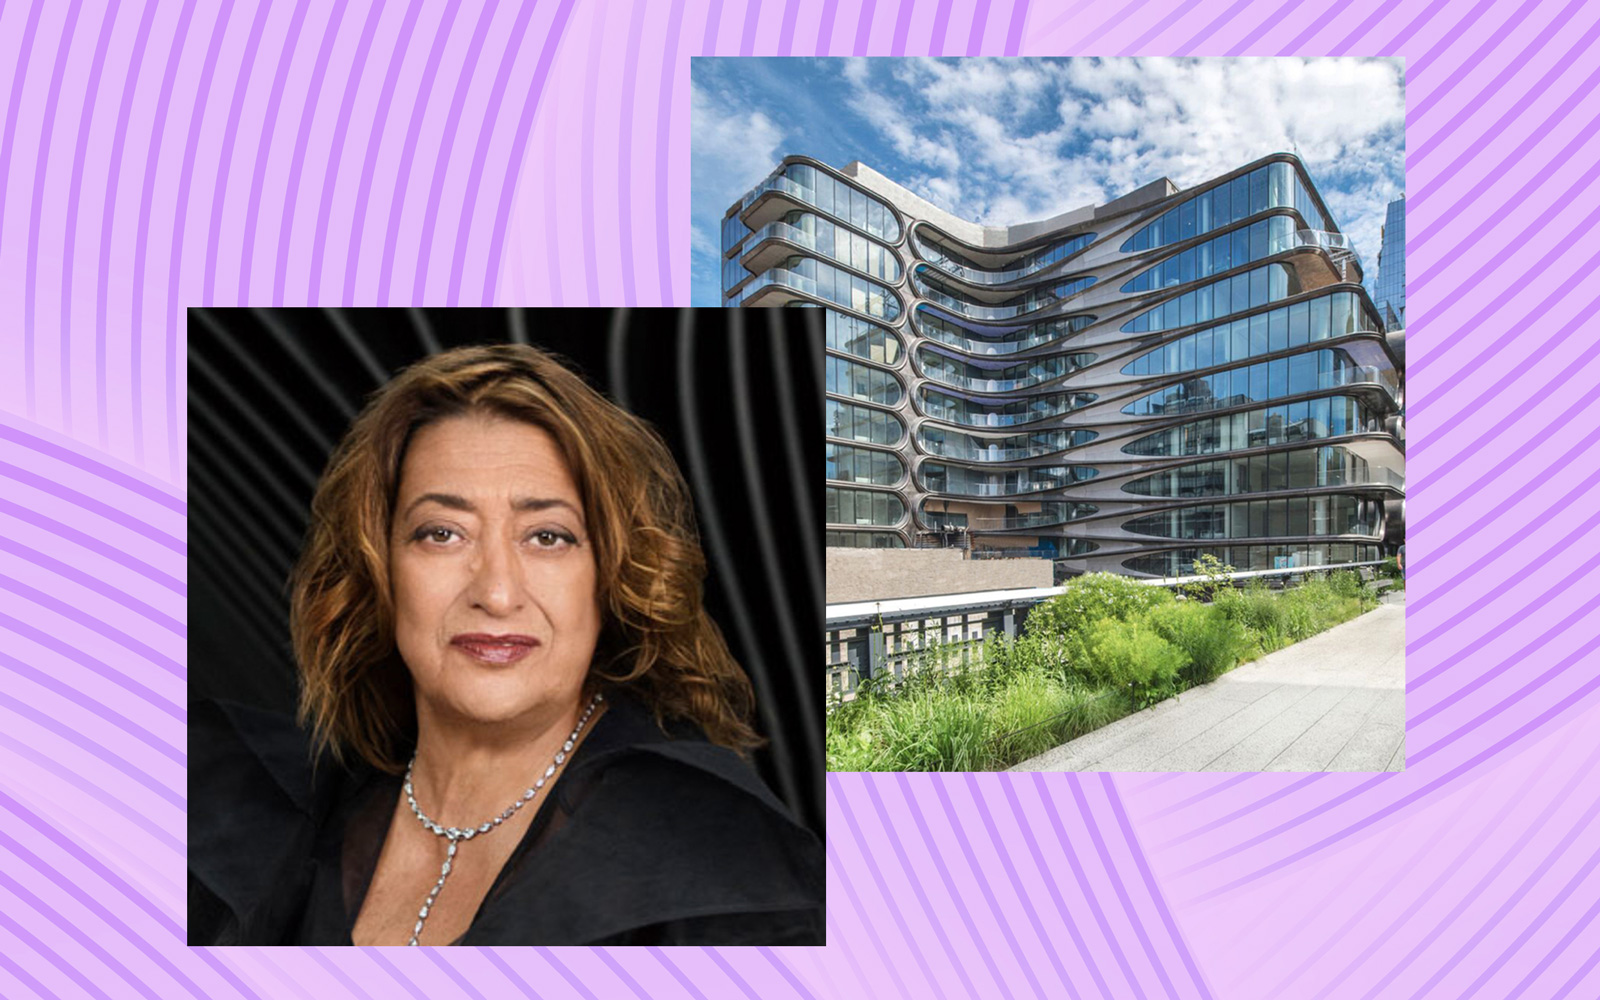 Credit Suisse exec buys at Related’s Zaha Hadid-designed Chelsea condo